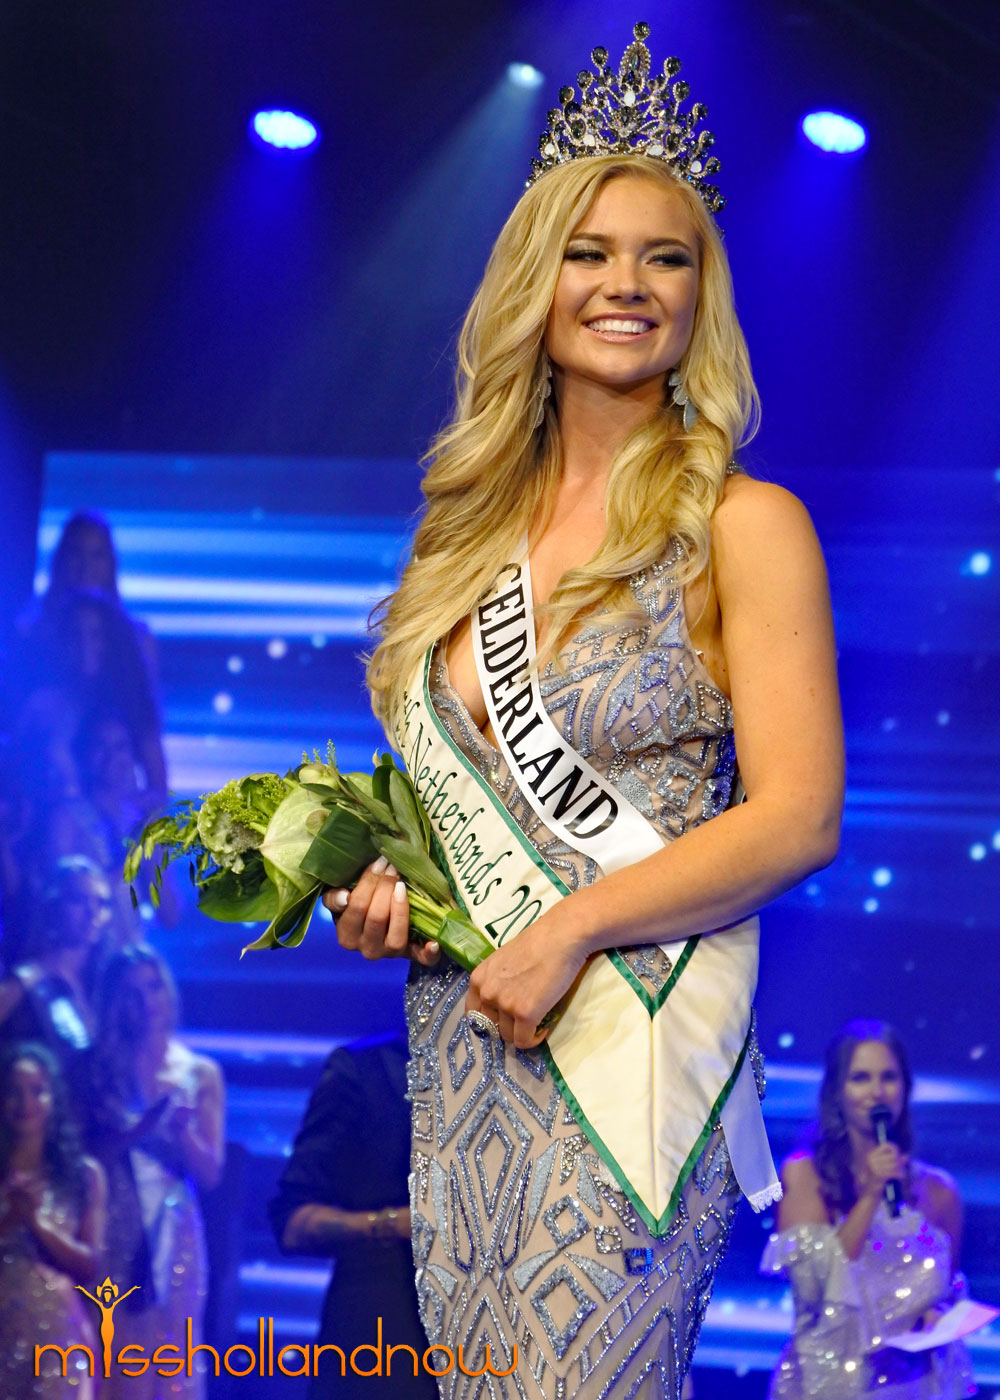 Miss Beauty Of The Netherlands 19 Miss Holland Now